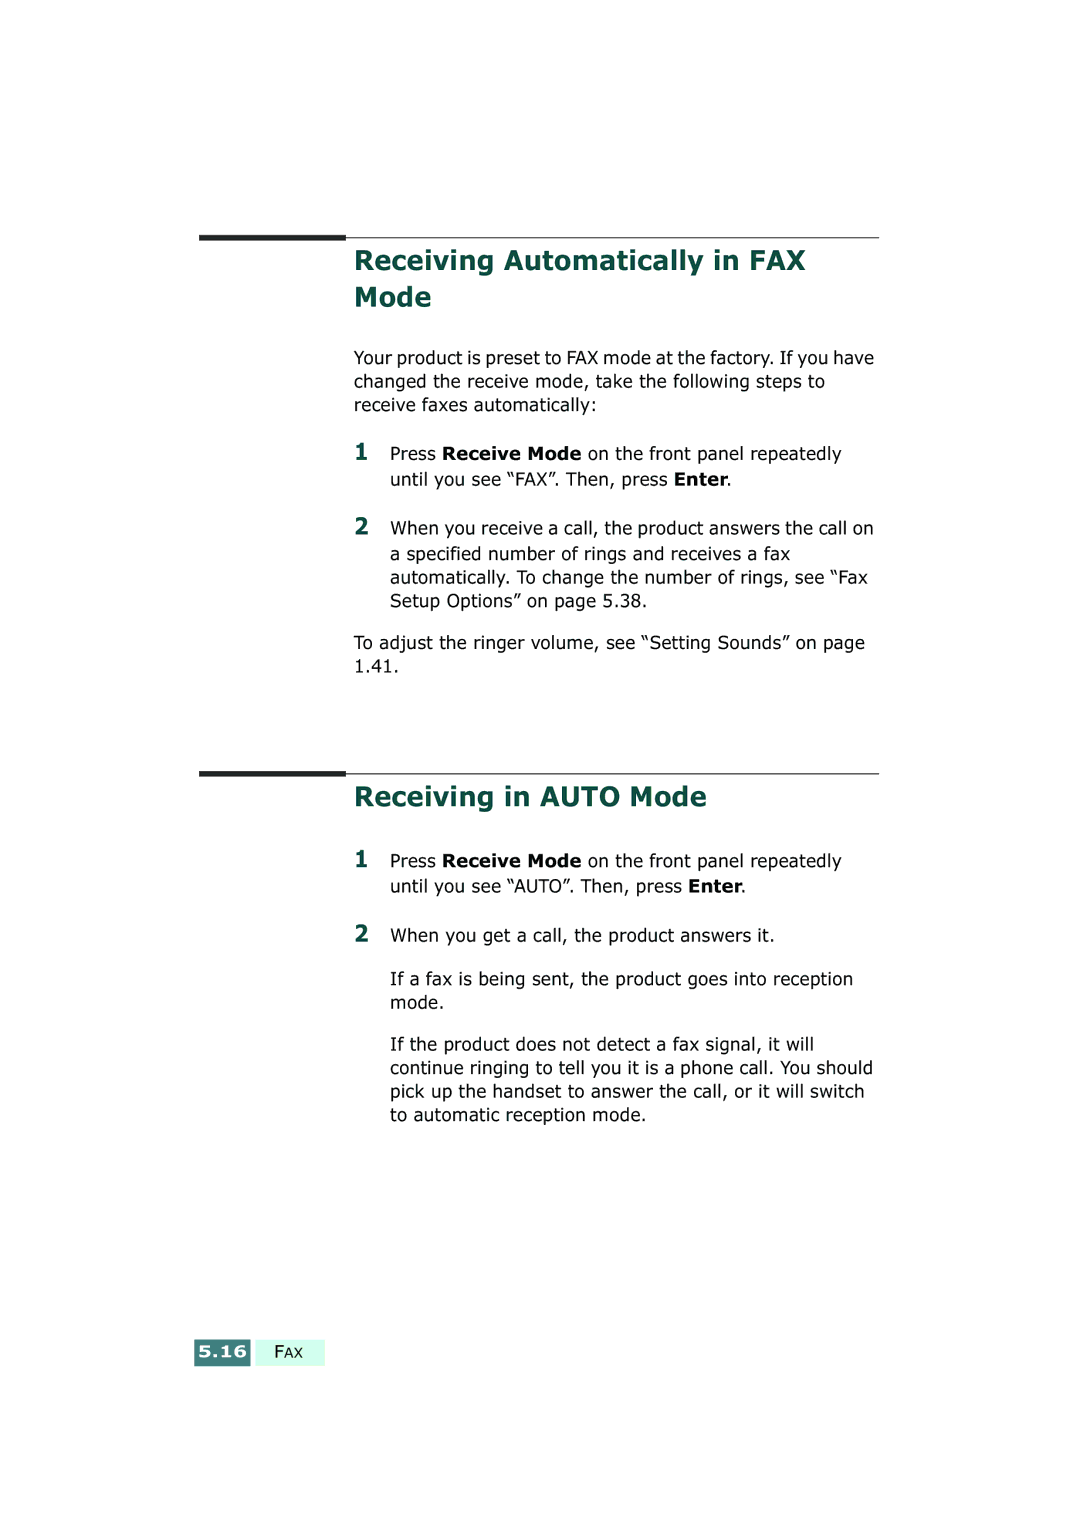 Samsung SF-430 manual Receiving Automatically in FAX Mode, Receiving in Auto Mode 